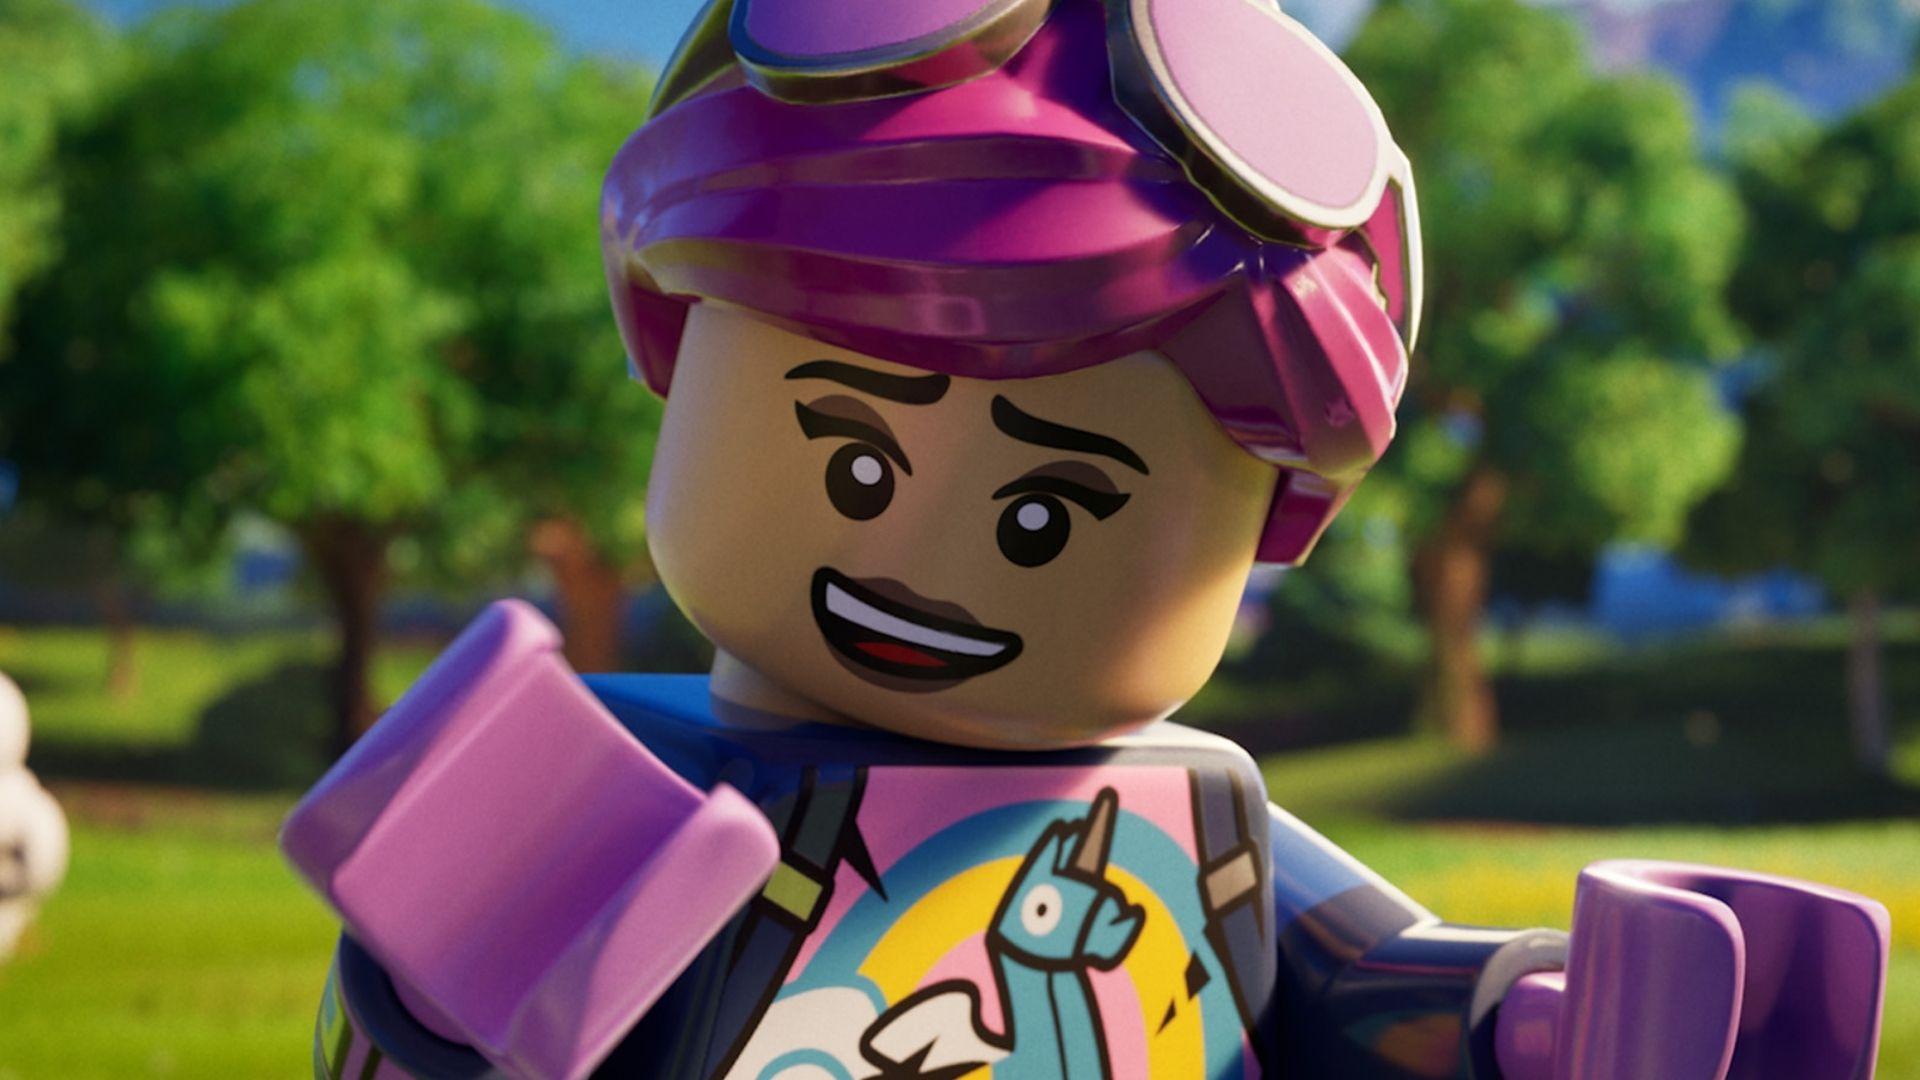 Lego Fortnite players are unhappy with its sub-Minecraft build limits